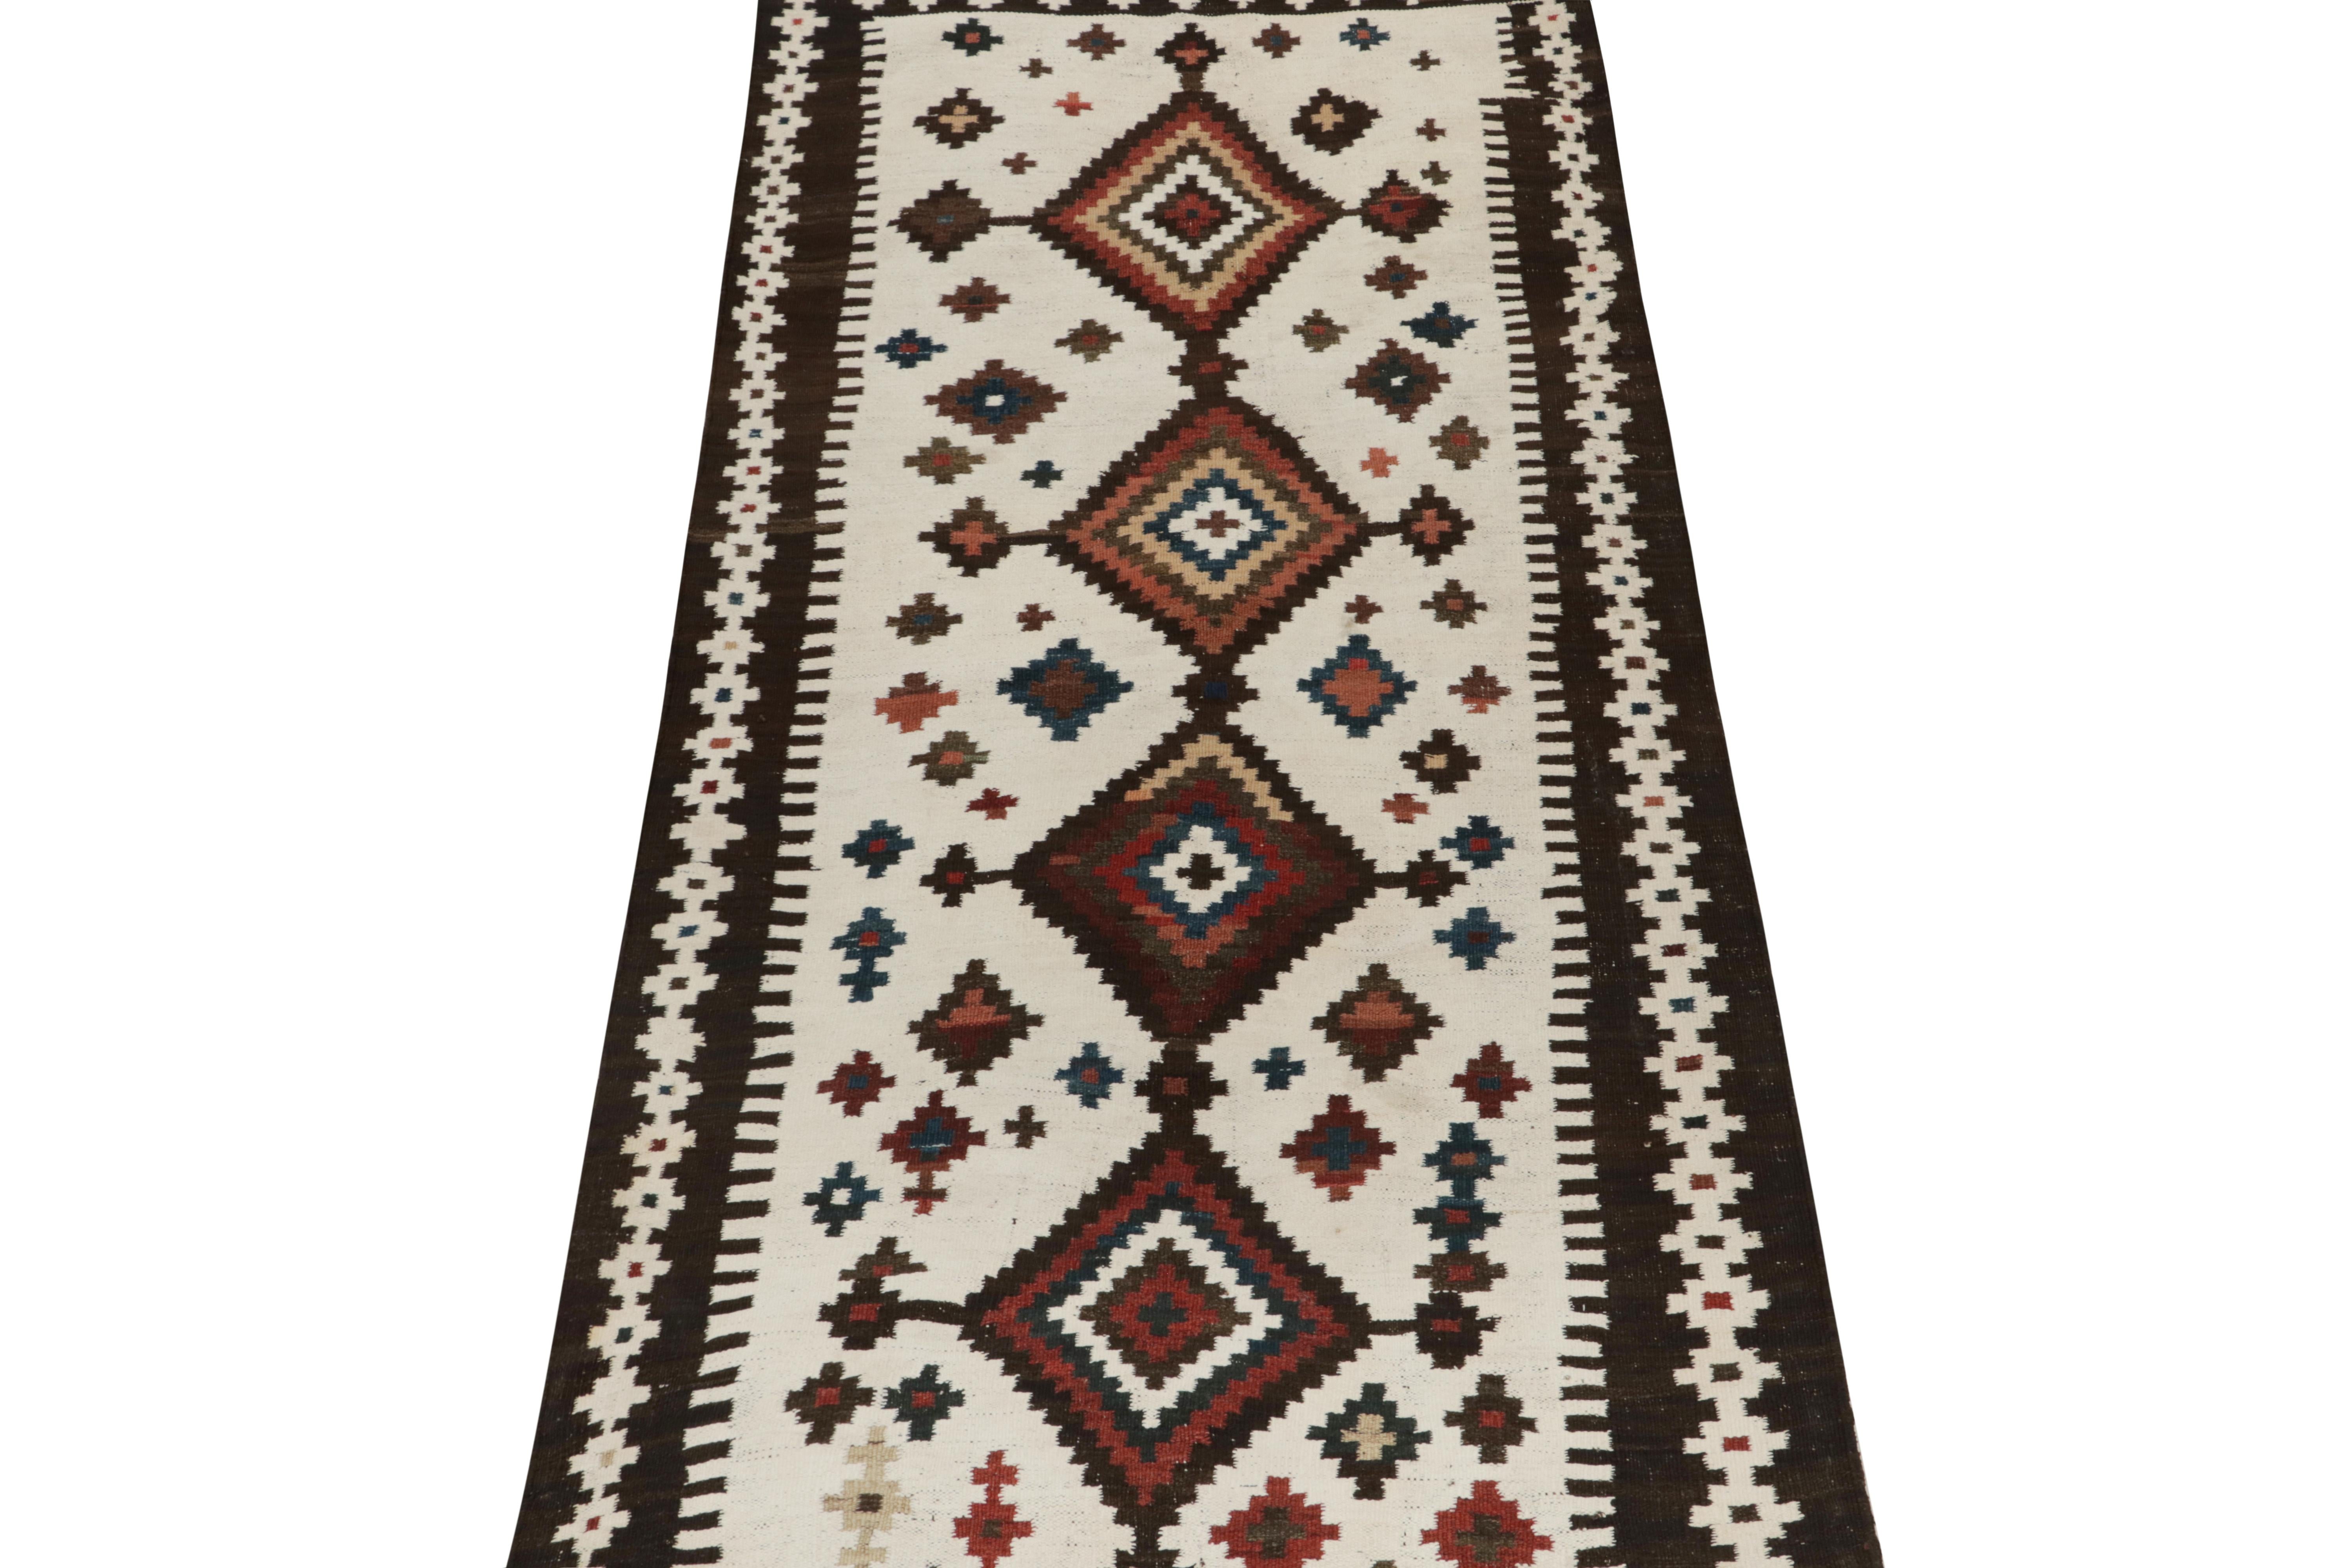 This vintage 4x7 Persian kilim is a unique tribal rug for its period, handwoven in wool circa 1950-1960.

Further on the Design:

A white open field hosts repeated medallions with an emphasis on rich brown, rust red, and blue accents.